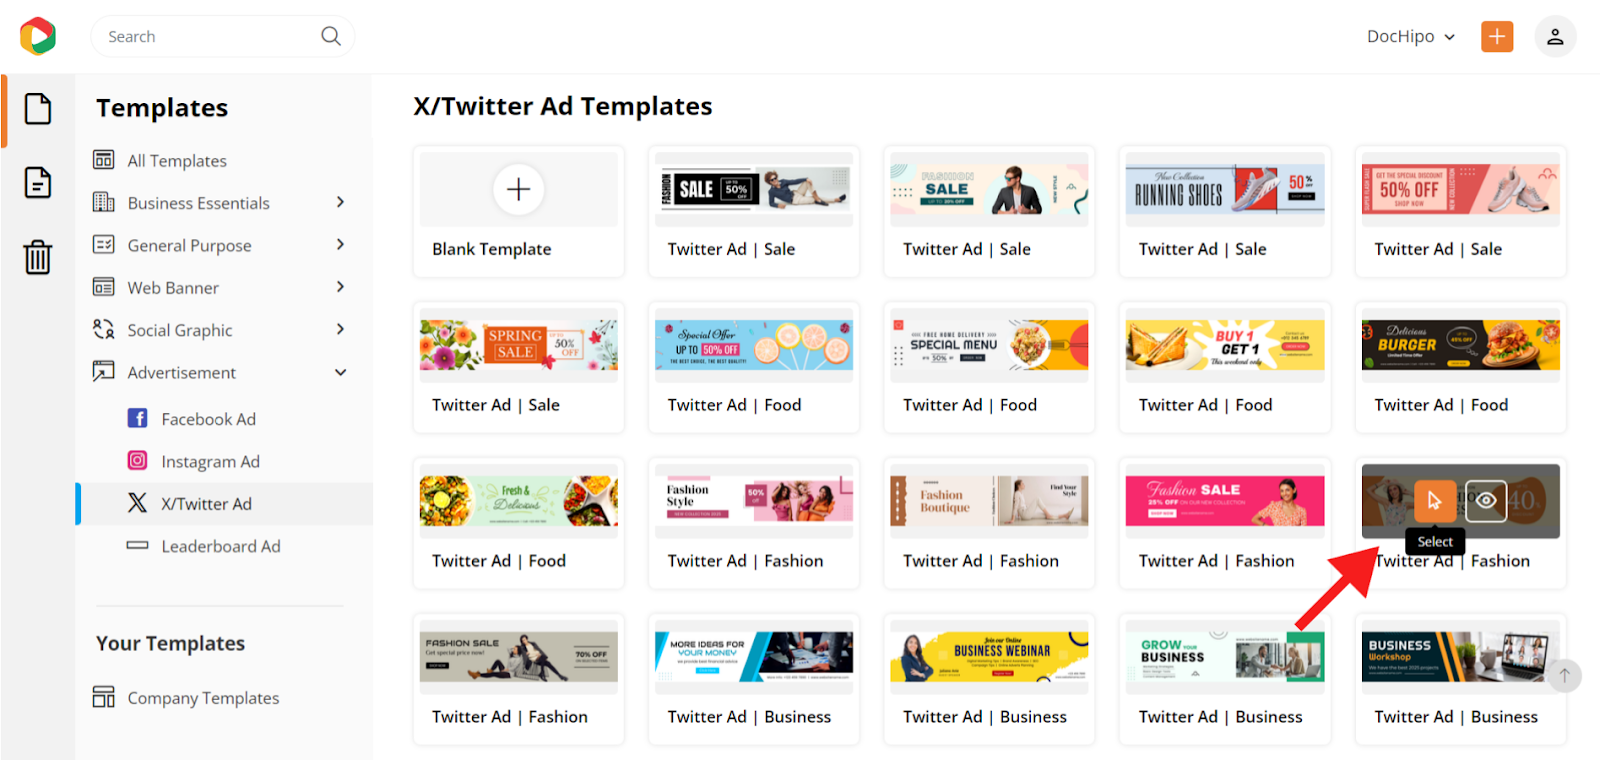 DocHipo templates for X/Twitter ad size